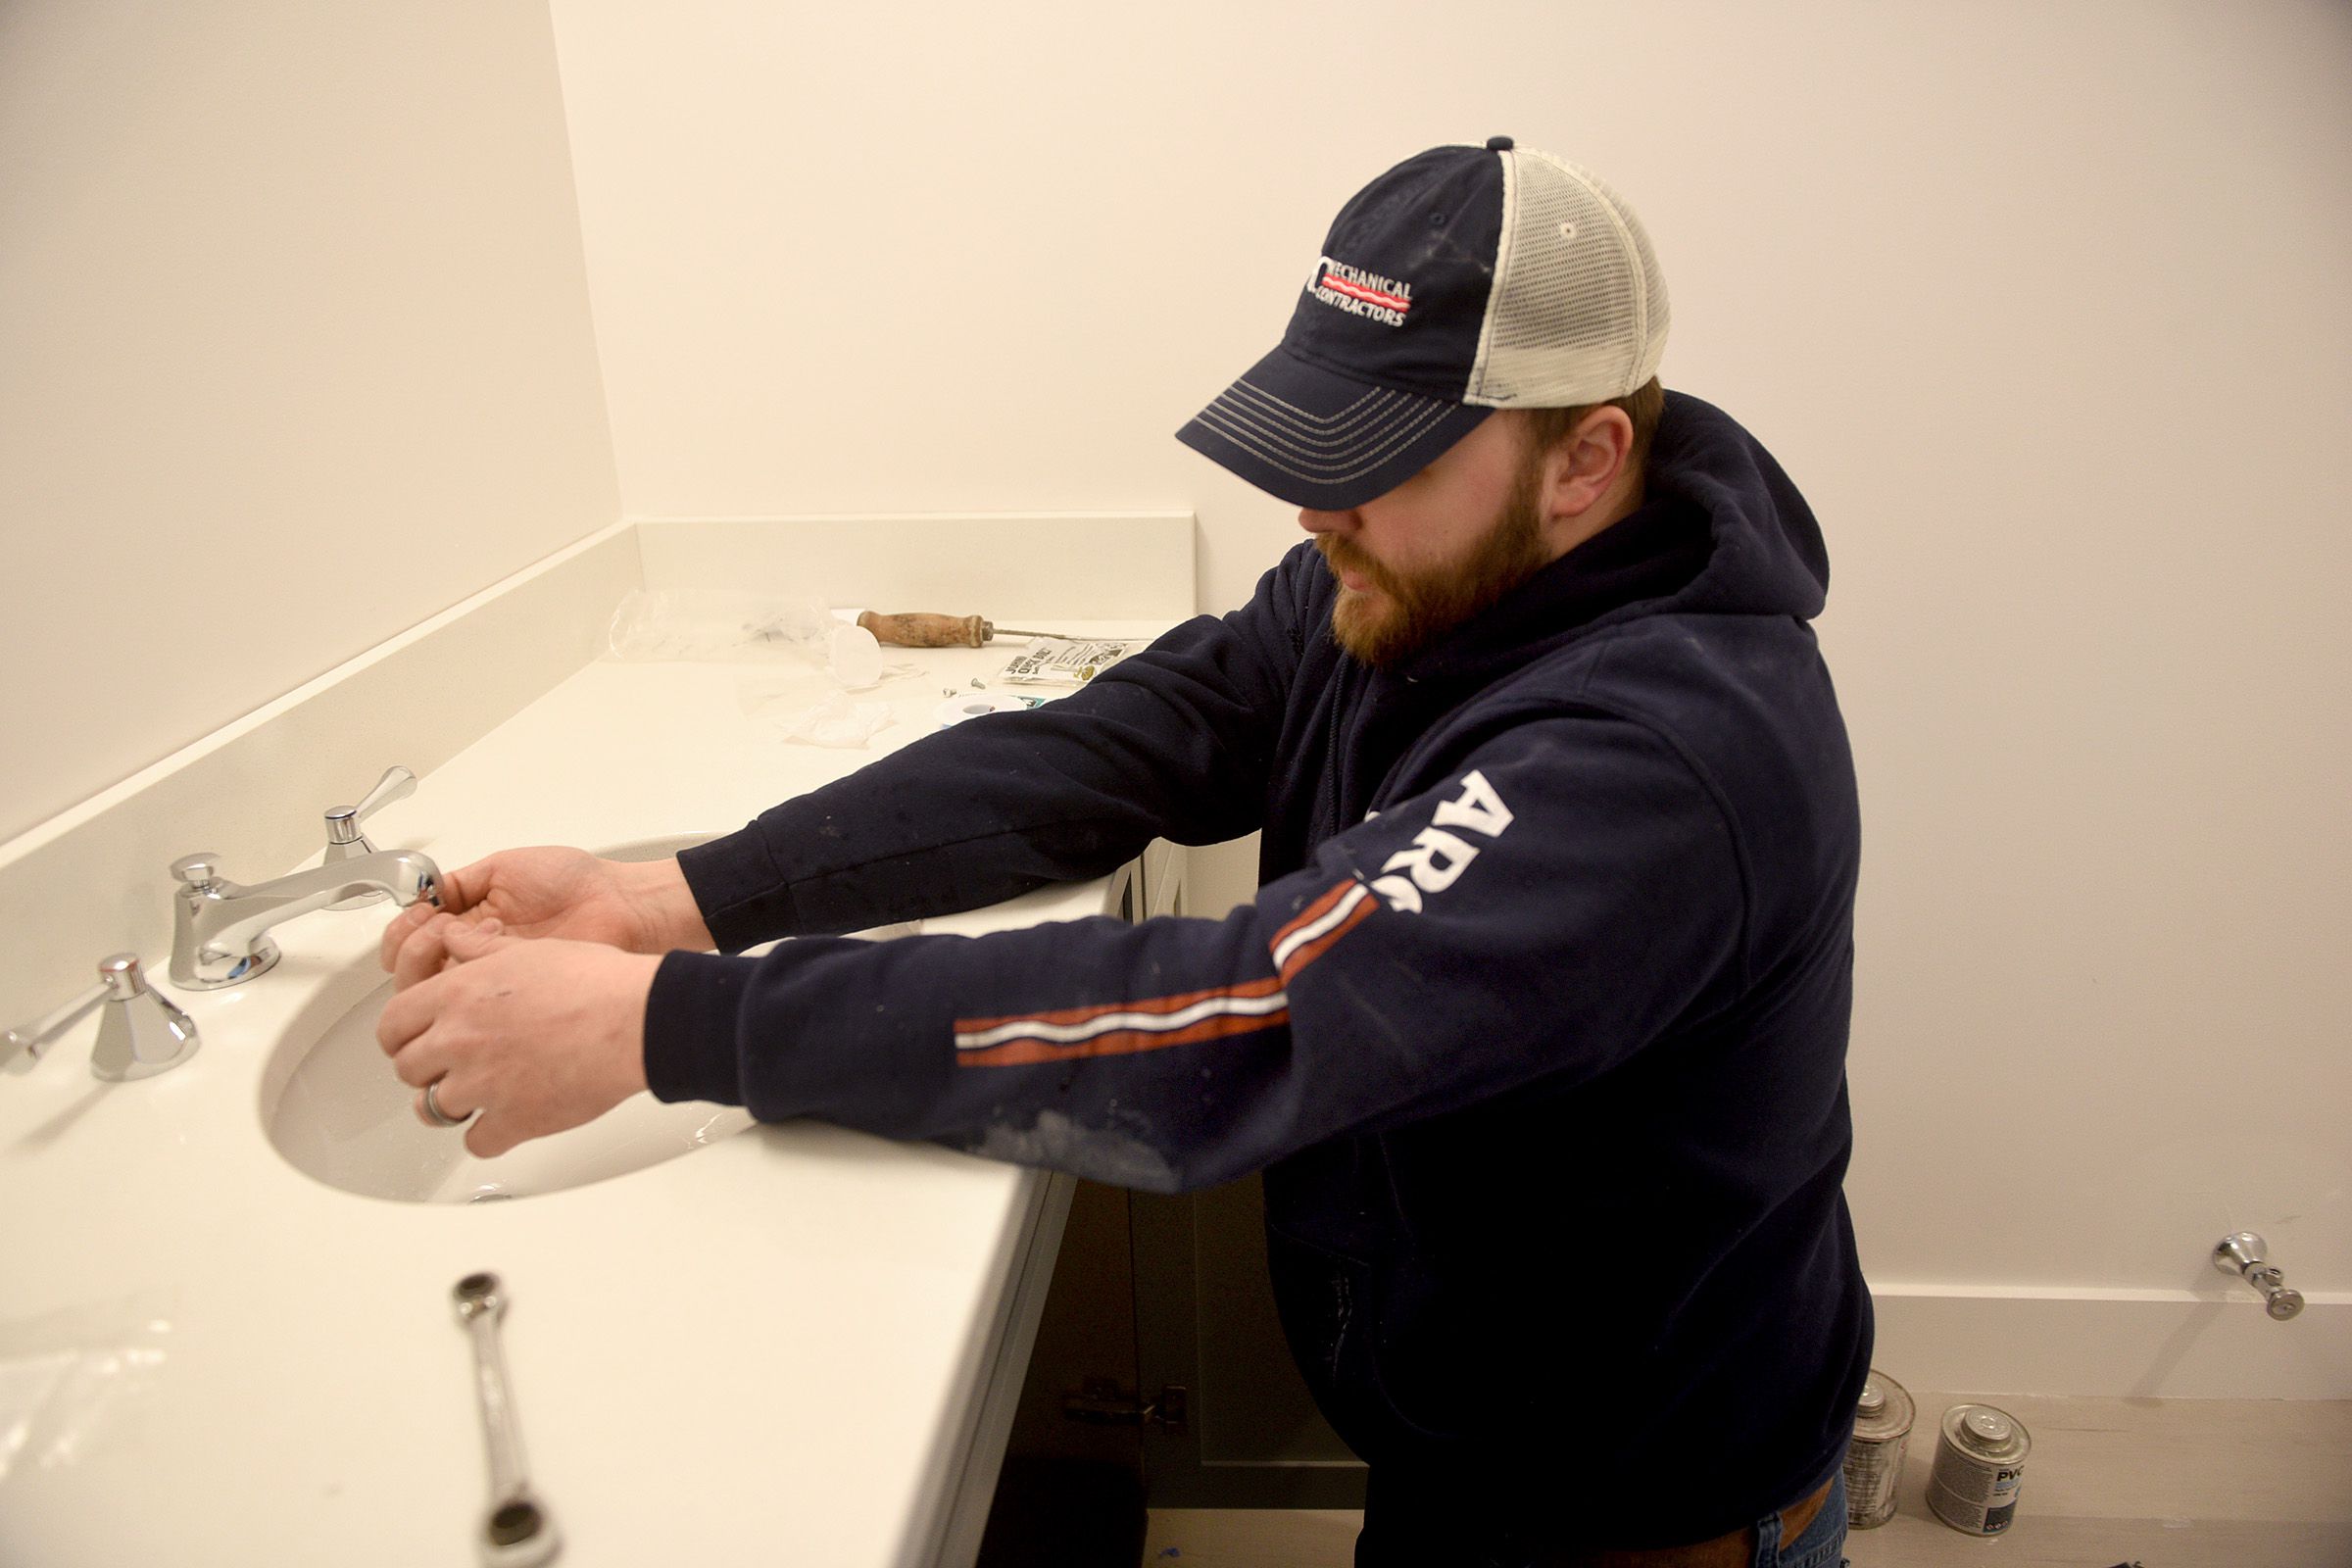 Marc Tetreault checks the water flow of a new bathroom at a job in Lebanon, N.H. on Wednesday, March 30, 2022. Tetreault is in his third year as a plumbing apprentice at ARC Mechanical Contractors. (Valley News - Jennifer Hauck) Copyright Valley News. May not be reprinted or used online without permission. Send requests to permission@vnews.com.